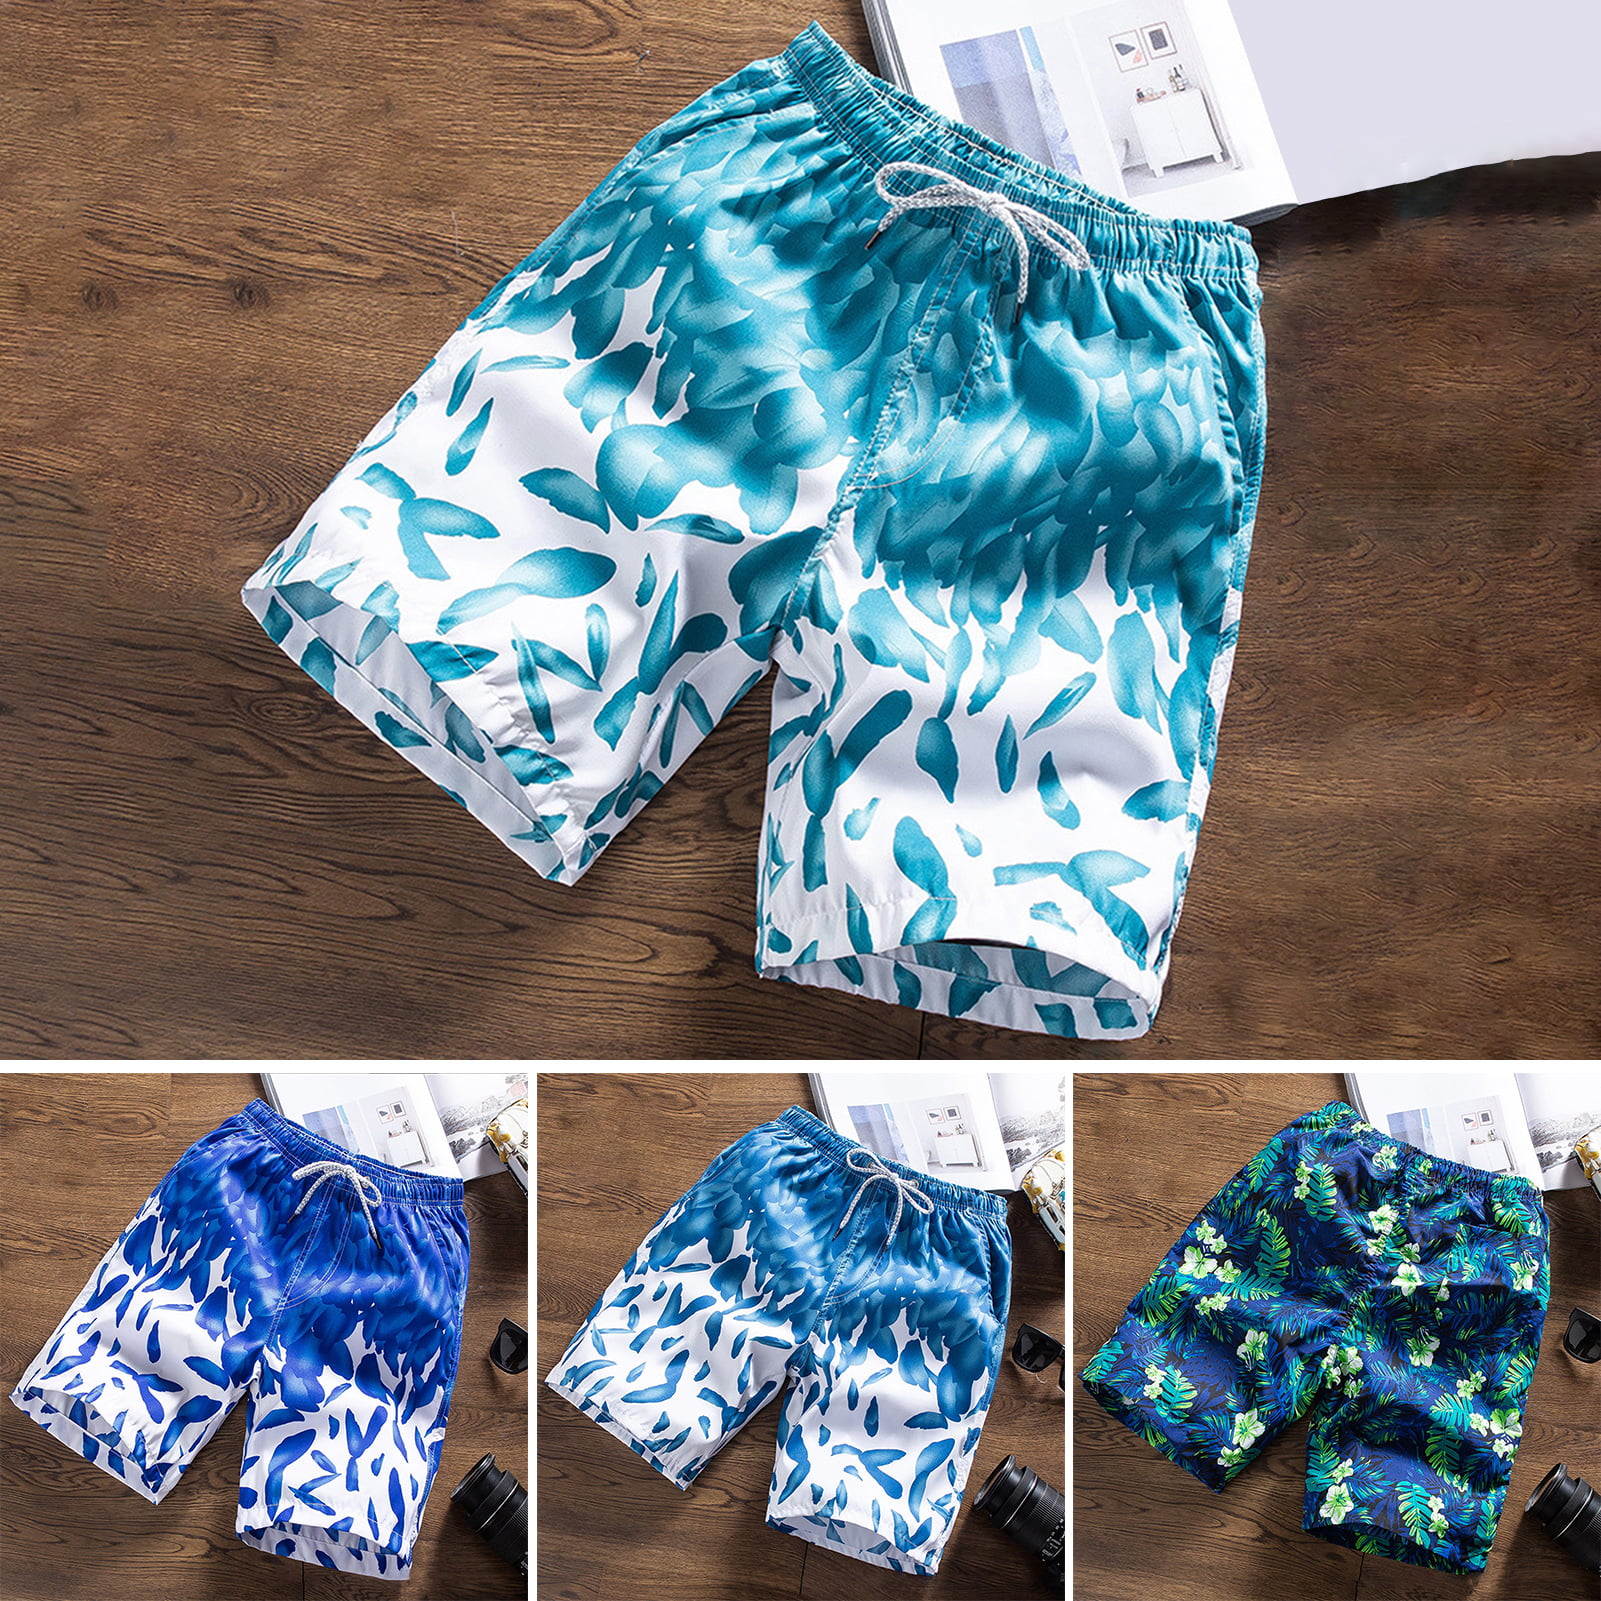 JERECY Mens Swim Trunks Colorful Feather Pattern Quick Dry Board Shorts with Drawstring and Pockets